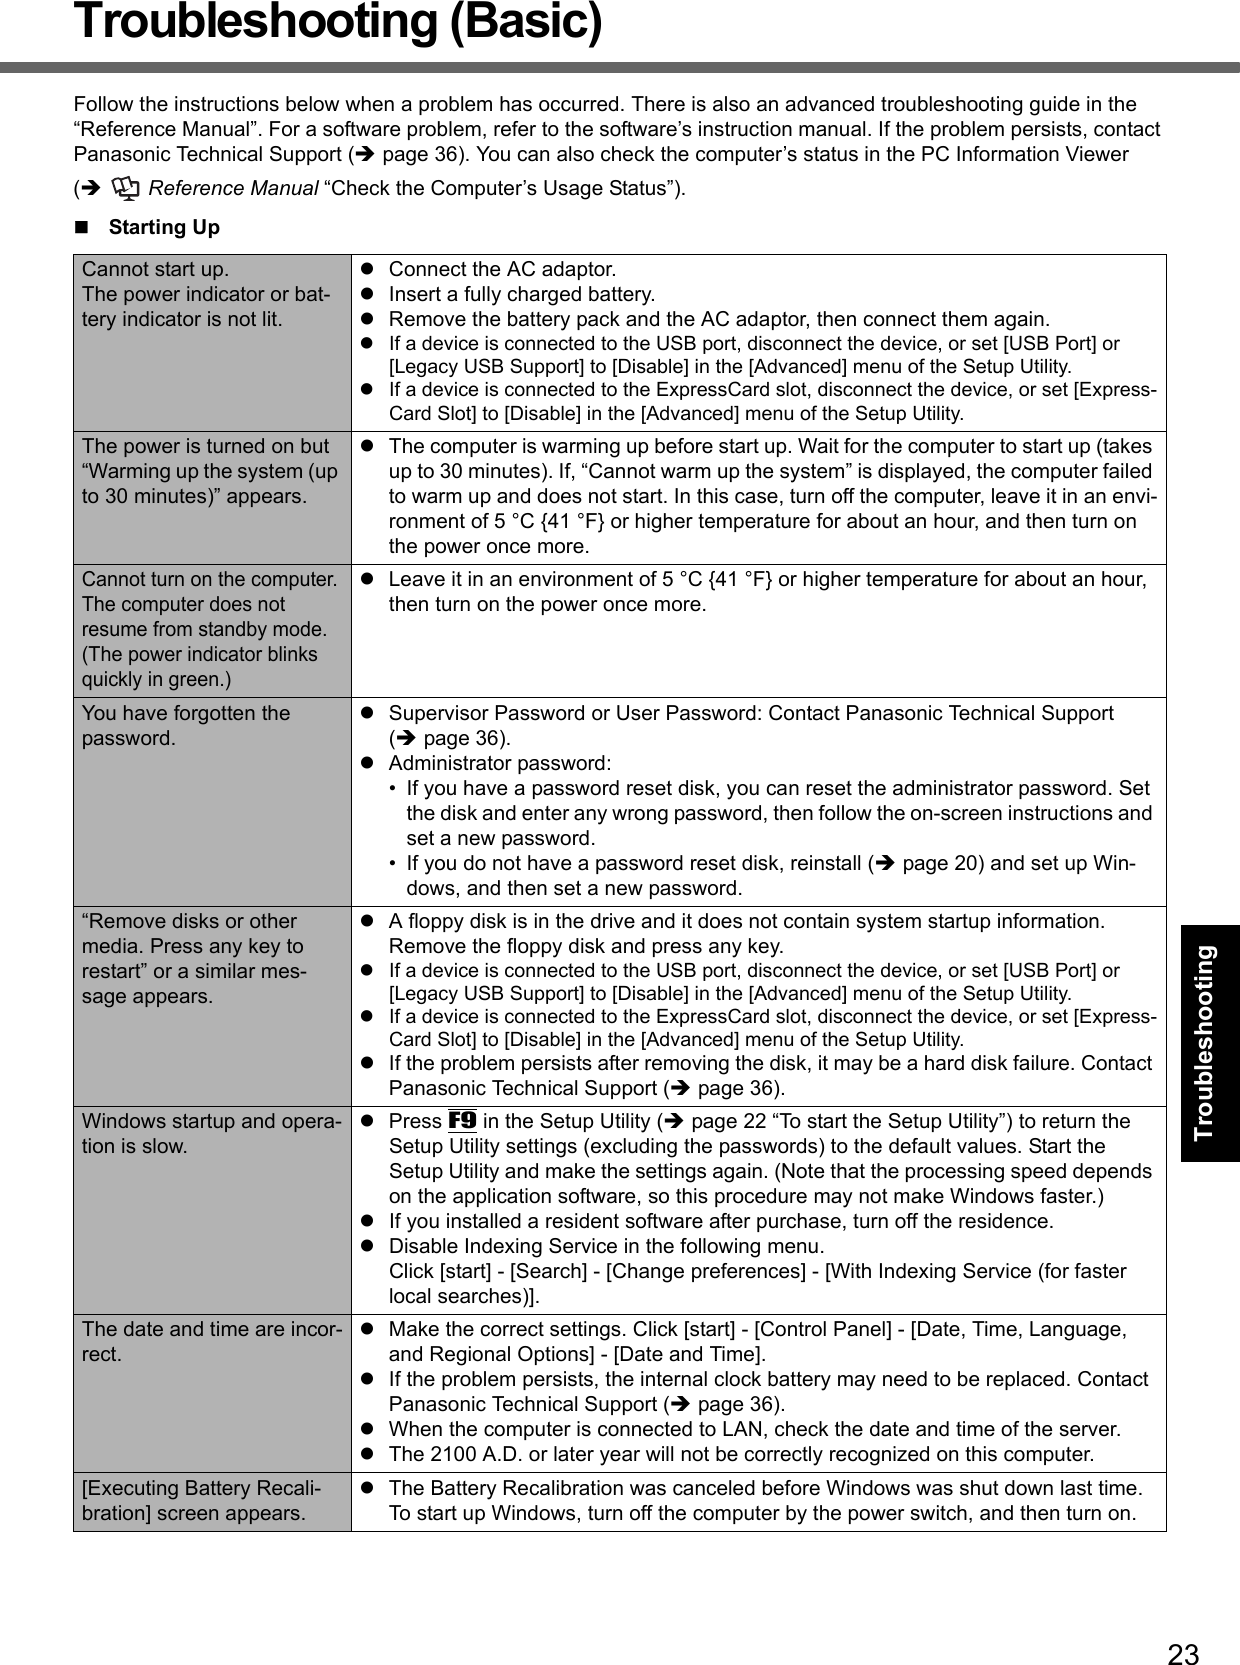 23Getting StartedUseful InformationTroubleshootingTroubleshooting (Basic)Follow the instructions below when a problem has occurred. There is also an advanced troubleshooting guide in the “Reference Manual”. For a software problem, refer to the software’s instruction manual. If the problem persists, contact Panasonic Technical Support (page 36). You can also check the computer’s status in the PC Information Viewer ( Reference Manual “Check the Computer’s Usage Status”).Starting UpCannot start up.The power indicator or bat-tery indicator is not lit.Connect the AC adaptor.Insert a fully charged battery.Remove the battery pack and the AC adaptor, then connect them again. If a device is connected to the USB port, disconnect the device, or set [USB Port] or [Legacy USB Support] to [Disable] in the [Advanced] menu of the Setup Utility.If a device is connected to the ExpressCard slot, disconnect the device, or set [Express-Card Slot] to [Disable] in the [Advanced] menu of the Setup Utility.The power is turned on but “Warming up the system (up to 30 minutes)” appears.The computer is warming up before start up. Wait for the computer to start up (takes up to 30 minutes). If, “Cannot warm up the system” is displayed, the computer failed to warm up and does not start. In this case, turn off the computer, leave it in an envi-ronment of 5 °C {41 °F} or higher temperature for about an hour, and then turn on the power once more.Cannot turn on the computer.The computer does not resume from standby mode.(The power indicator blinks quickly in green.)Leave it in an environment of 5 °C {41 °F} or higher temperature for about an hour, then turn on the power once more.You have forgotten the password.Supervisor Password or User Password: Contact Panasonic Technical Support (page 36).Administrator password: • If you have a password reset disk, you can reset the administrator password. Set the disk and enter any wrong password, then follow the on-screen instructions and set a new password.• If you do not have a password reset disk, reinstall (page 20) and set up Win-dows, and then set a new password.“Remove disks or other media. Press any key to restart” or a similar mes-sage appears.A floppy disk is in the drive and it does not contain system startup information. Remove the floppy disk and press any key.If a device is connected to the USB port, disconnect the device, or set [USB Port] or [Legacy USB Support] to [Disable] in the [Advanced] menu of the Setup Utility.If a device is connected to the ExpressCard slot, disconnect the device, or set [Express-Card Slot] to [Disable] in the [Advanced] menu of the Setup Utility.If the problem persists after removing the disk, it may be a hard disk failure. Contact Panasonic Technical Support (page 36).Windows startup and opera-tion is slow.Press F9 in the Setup Utility (page 22 “To start the Setup Utility”) to return the Setup Utility settings (excluding the passwords) to the default values. Start the Setup Utility and make the settings again. (Note that the processing speed depends on the application software, so this procedure may not make Windows faster.)If you installed a resident software after purchase, turn off the residence.Disable Indexing Service in the following menu.Click [start] - [Search] - [Change preferences] - [With Indexing Service (for faster local searches)].The date and time are incor-rect.Make the correct settings. Click [start] - [Control Panel] - [Date, Time, Language, and Regional Options] - [Date and Time].If the problem persists, the internal clock battery may need to be replaced. Contact Panasonic Technical Support (page 36).When the computer is connected to LAN, check the date and time of the server.The 2100 A.D. or later year will not be correctly recognized on this computer.[Executing Battery Recali-bration] screen appears.The Battery Recalibration was canceled before Windows was shut down last time. To start up Windows, turn off the computer by the power switch, and then turn on.